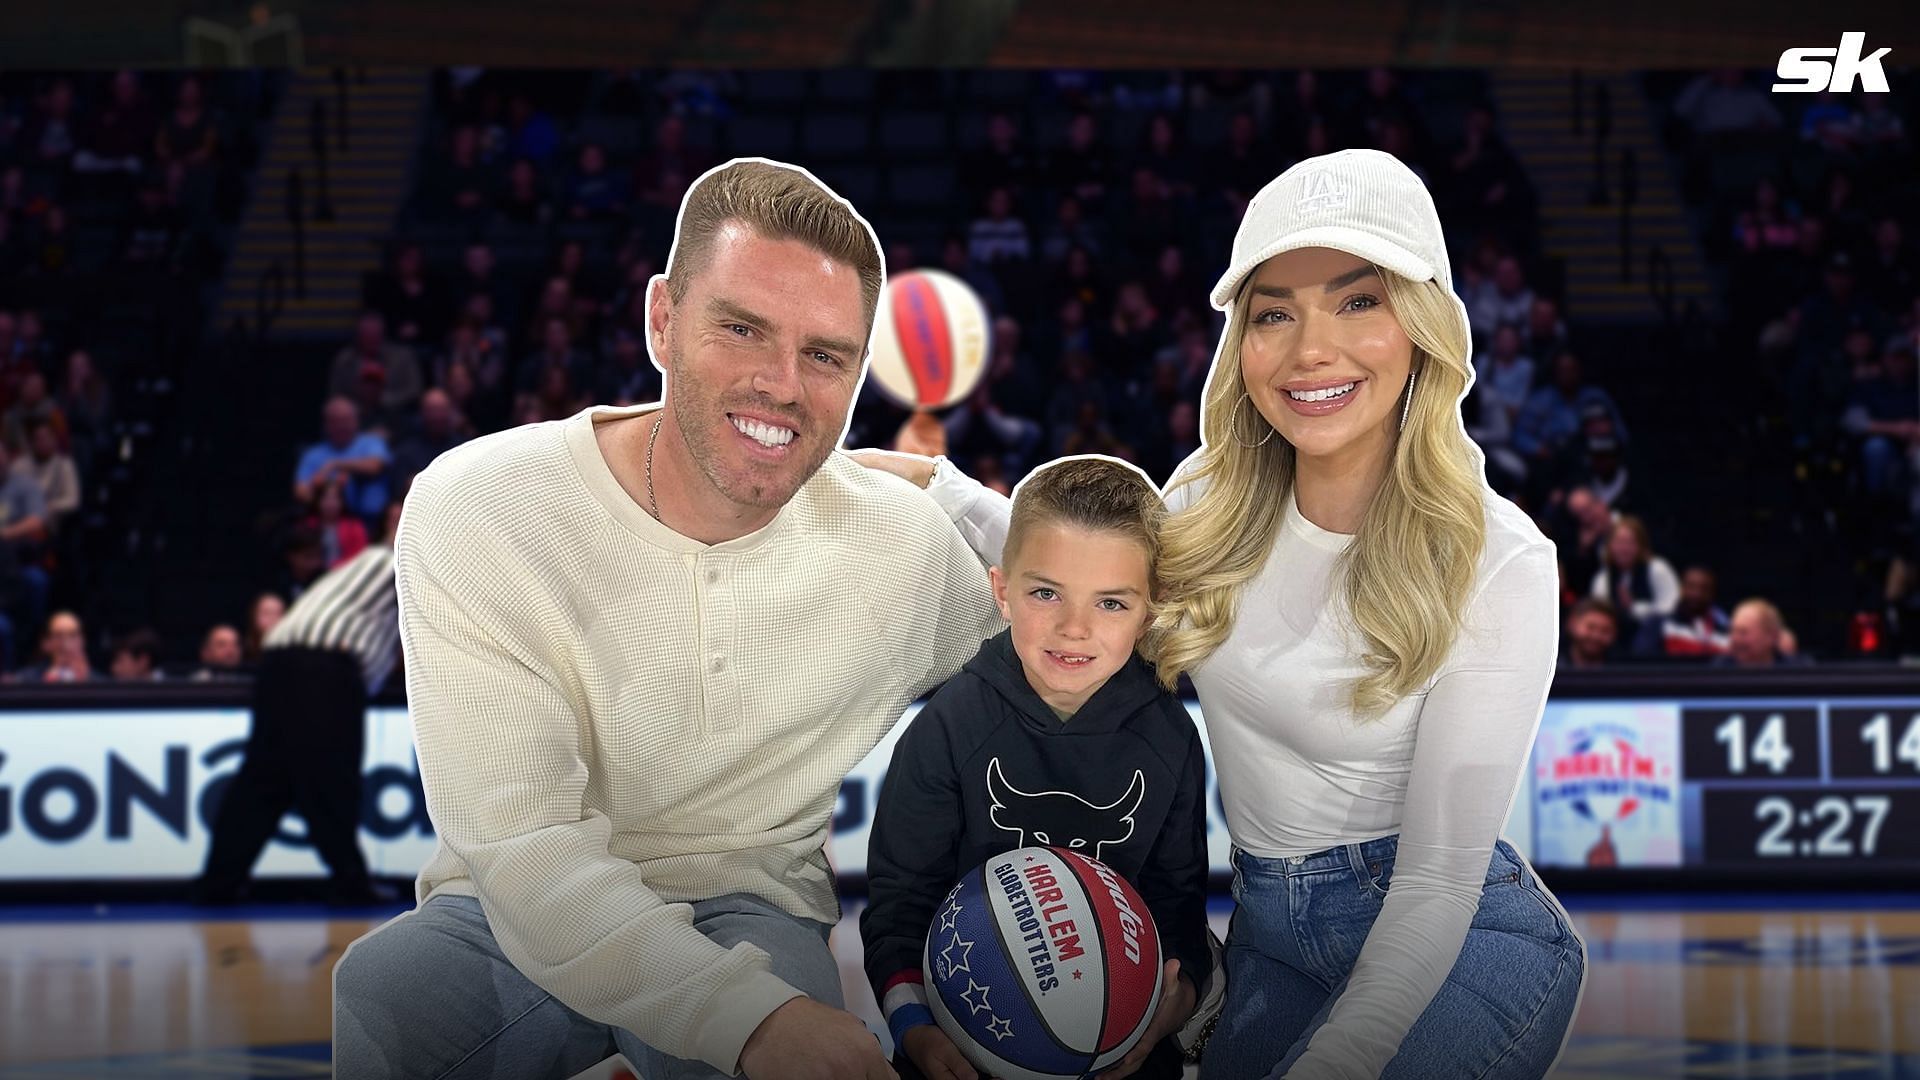 Dodgers star Freddie Freeman took in a Harlem Globetrotters game with his wife and son